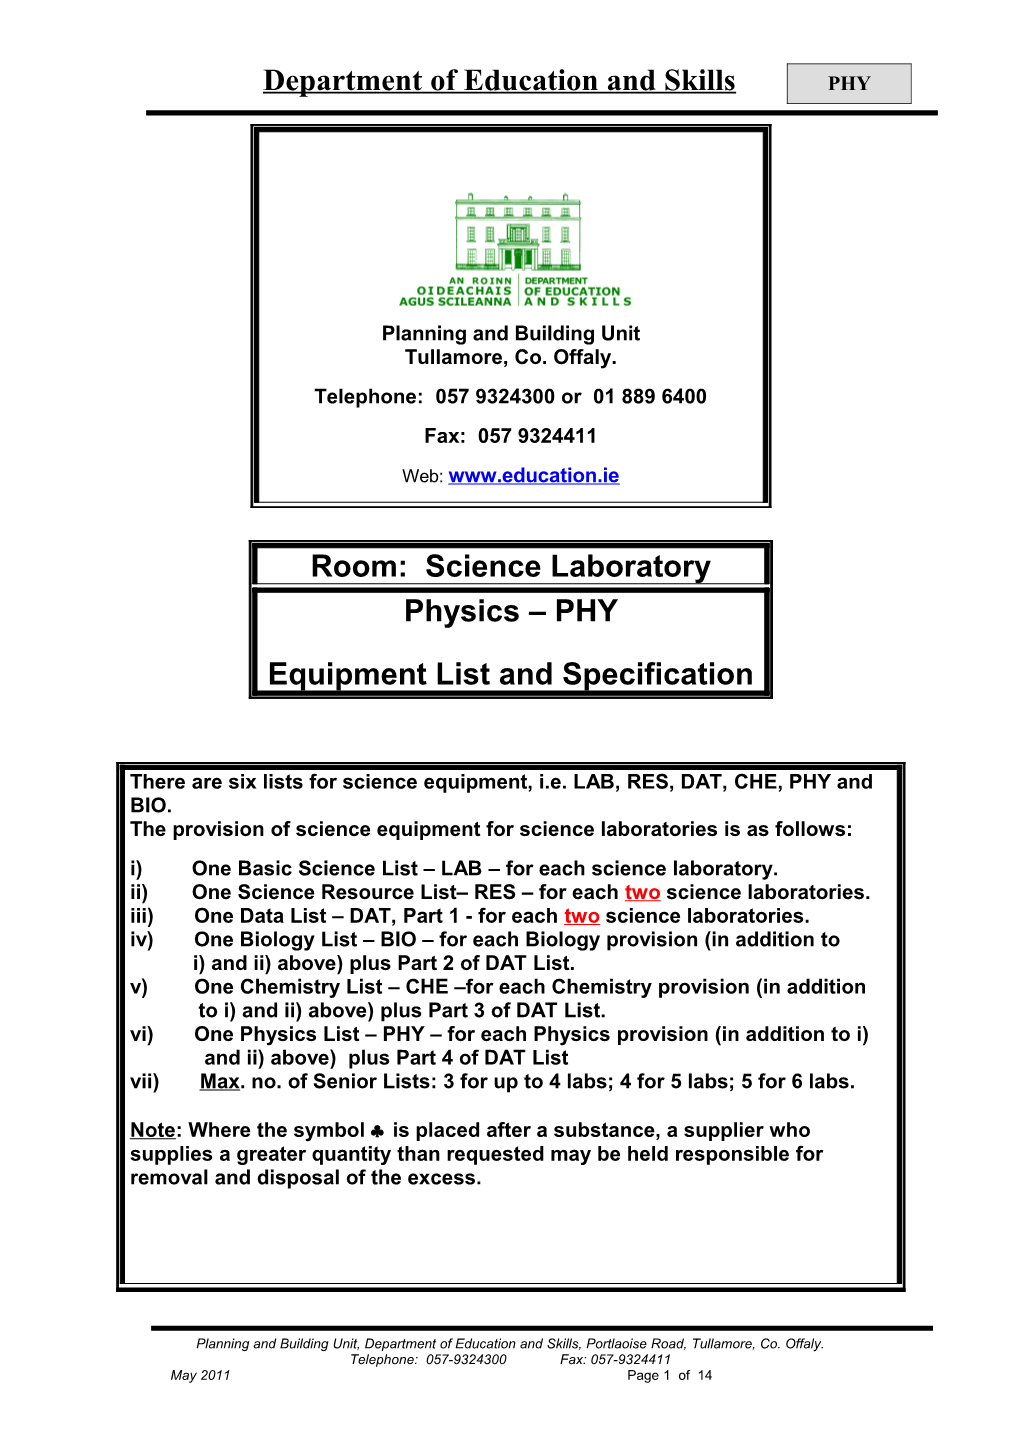 Room: Science Laboratory - Physics - PHY - Equipment List and Specification (Format Word 315KB)